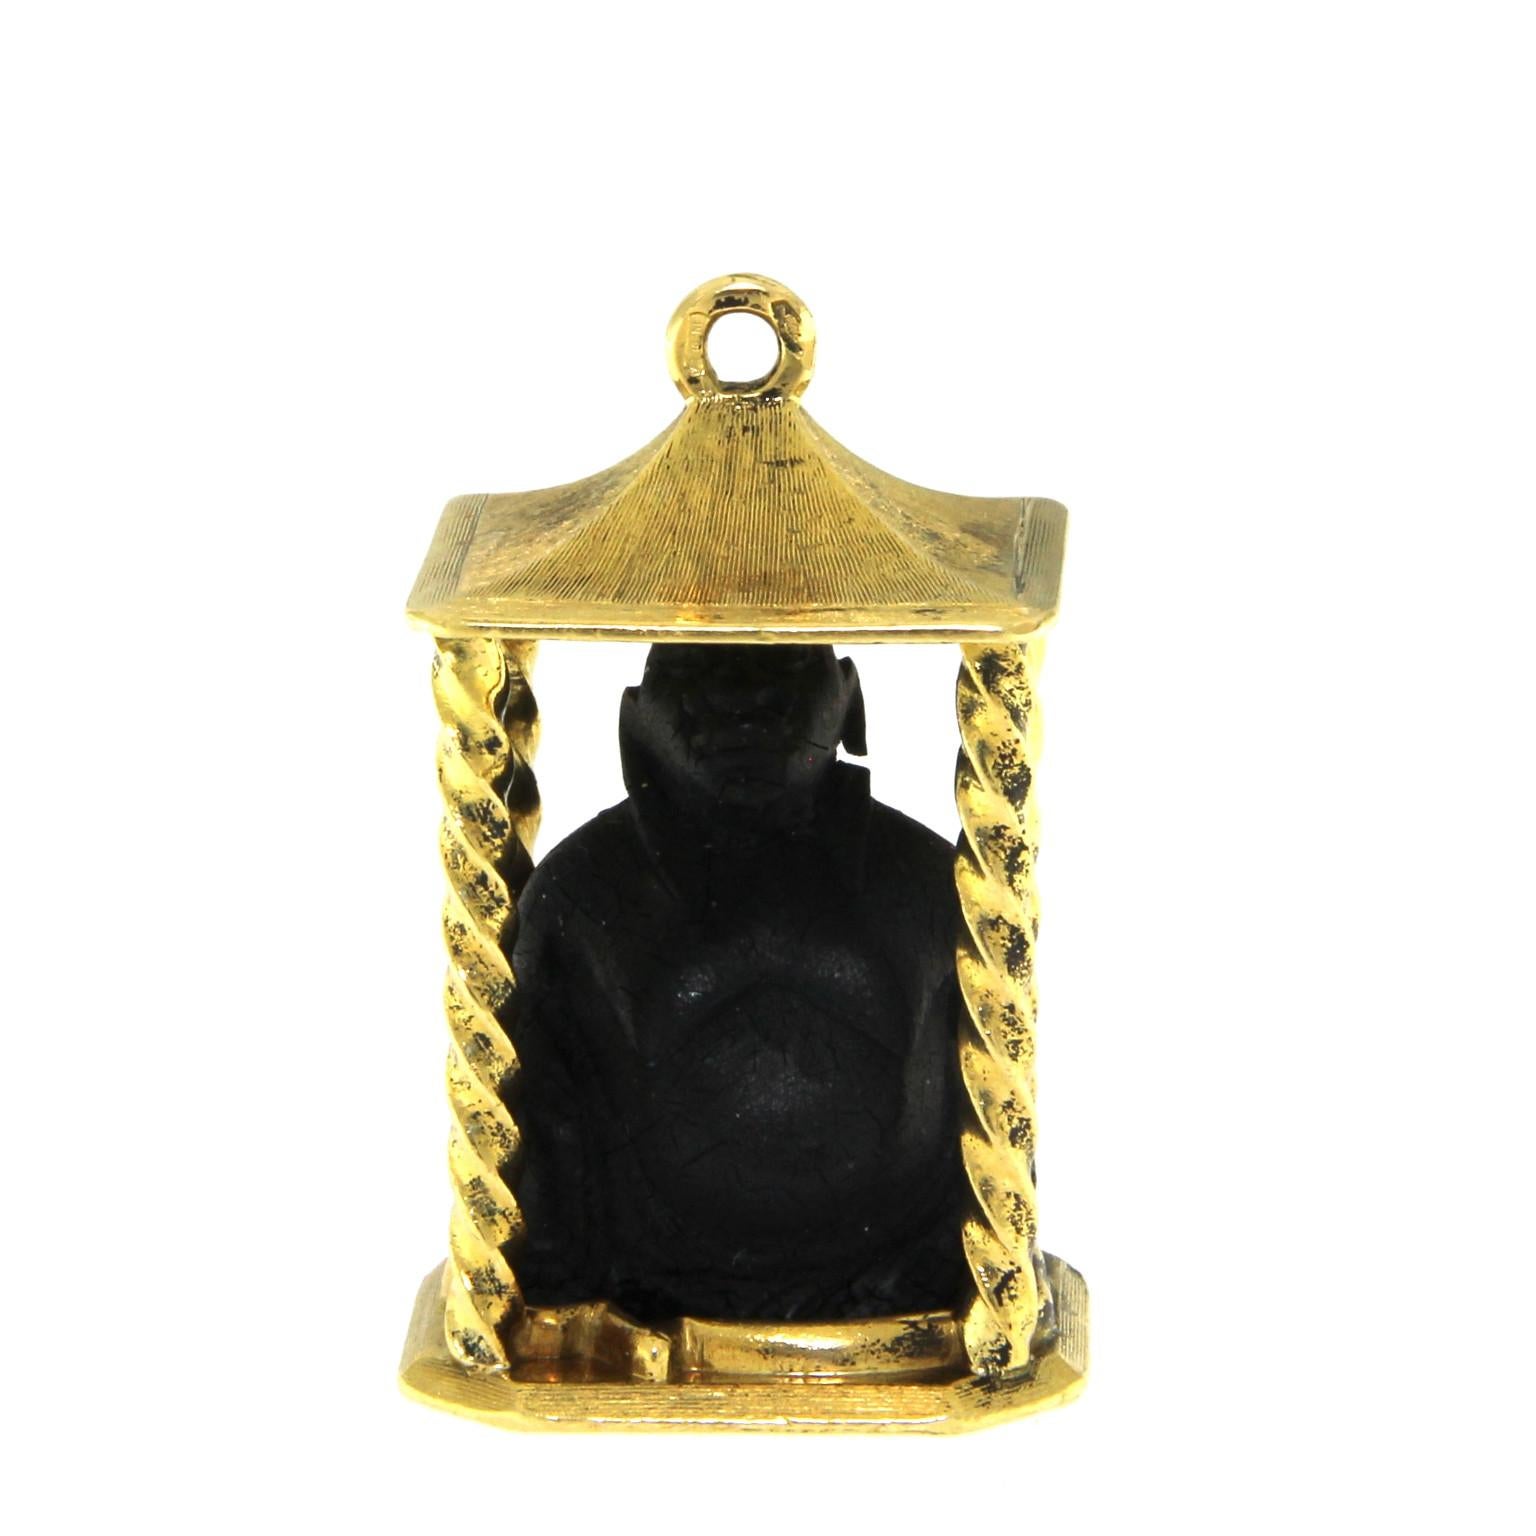 unique pendant 18K yellow gold and ebony

Ebony is engraved representing Buddah

total weigh is 15 g